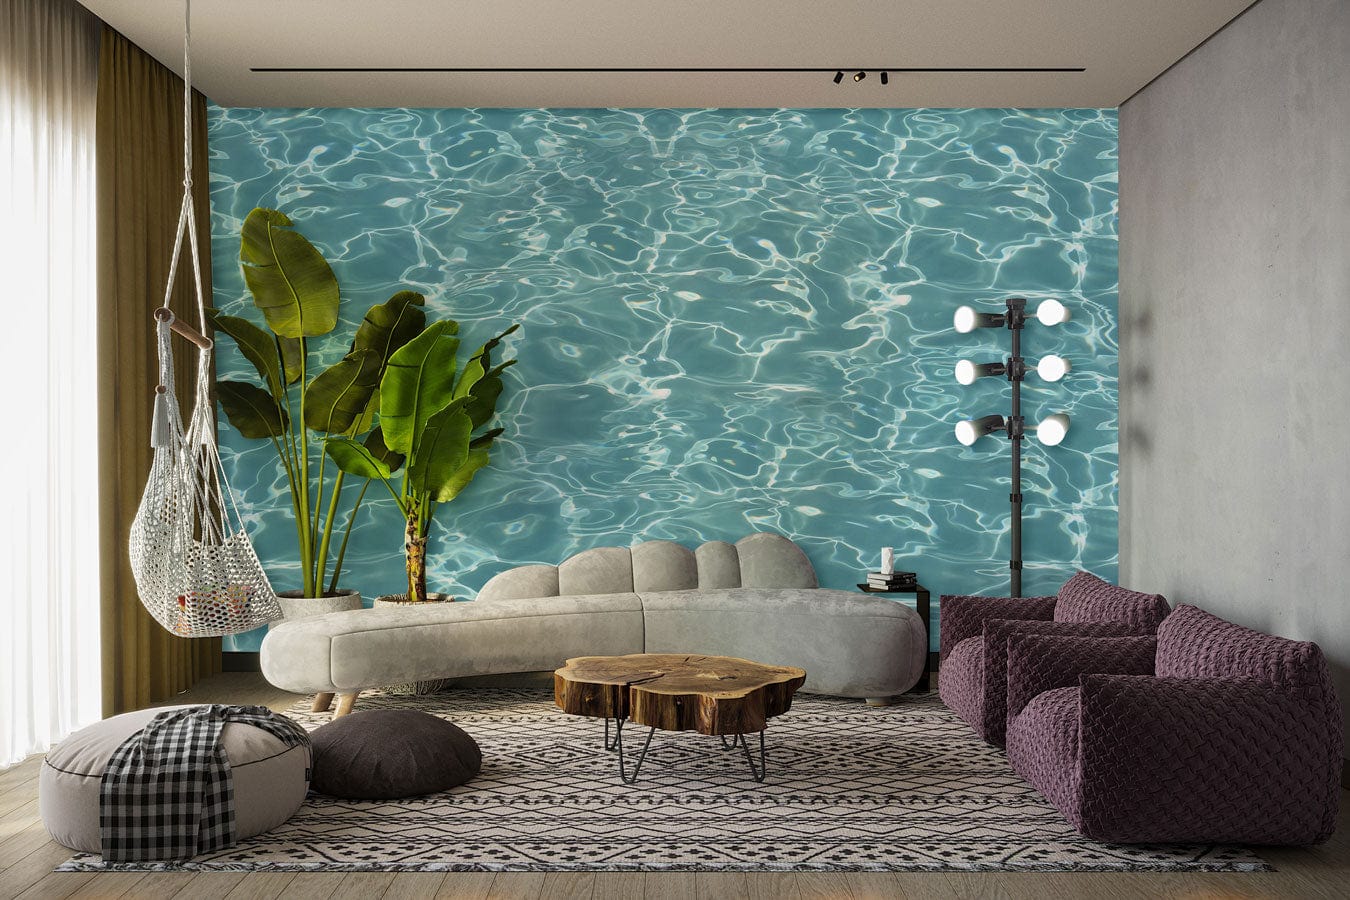 Wallpaper mural featuring ocean waves in turquoise, perfect for decorating the living room.